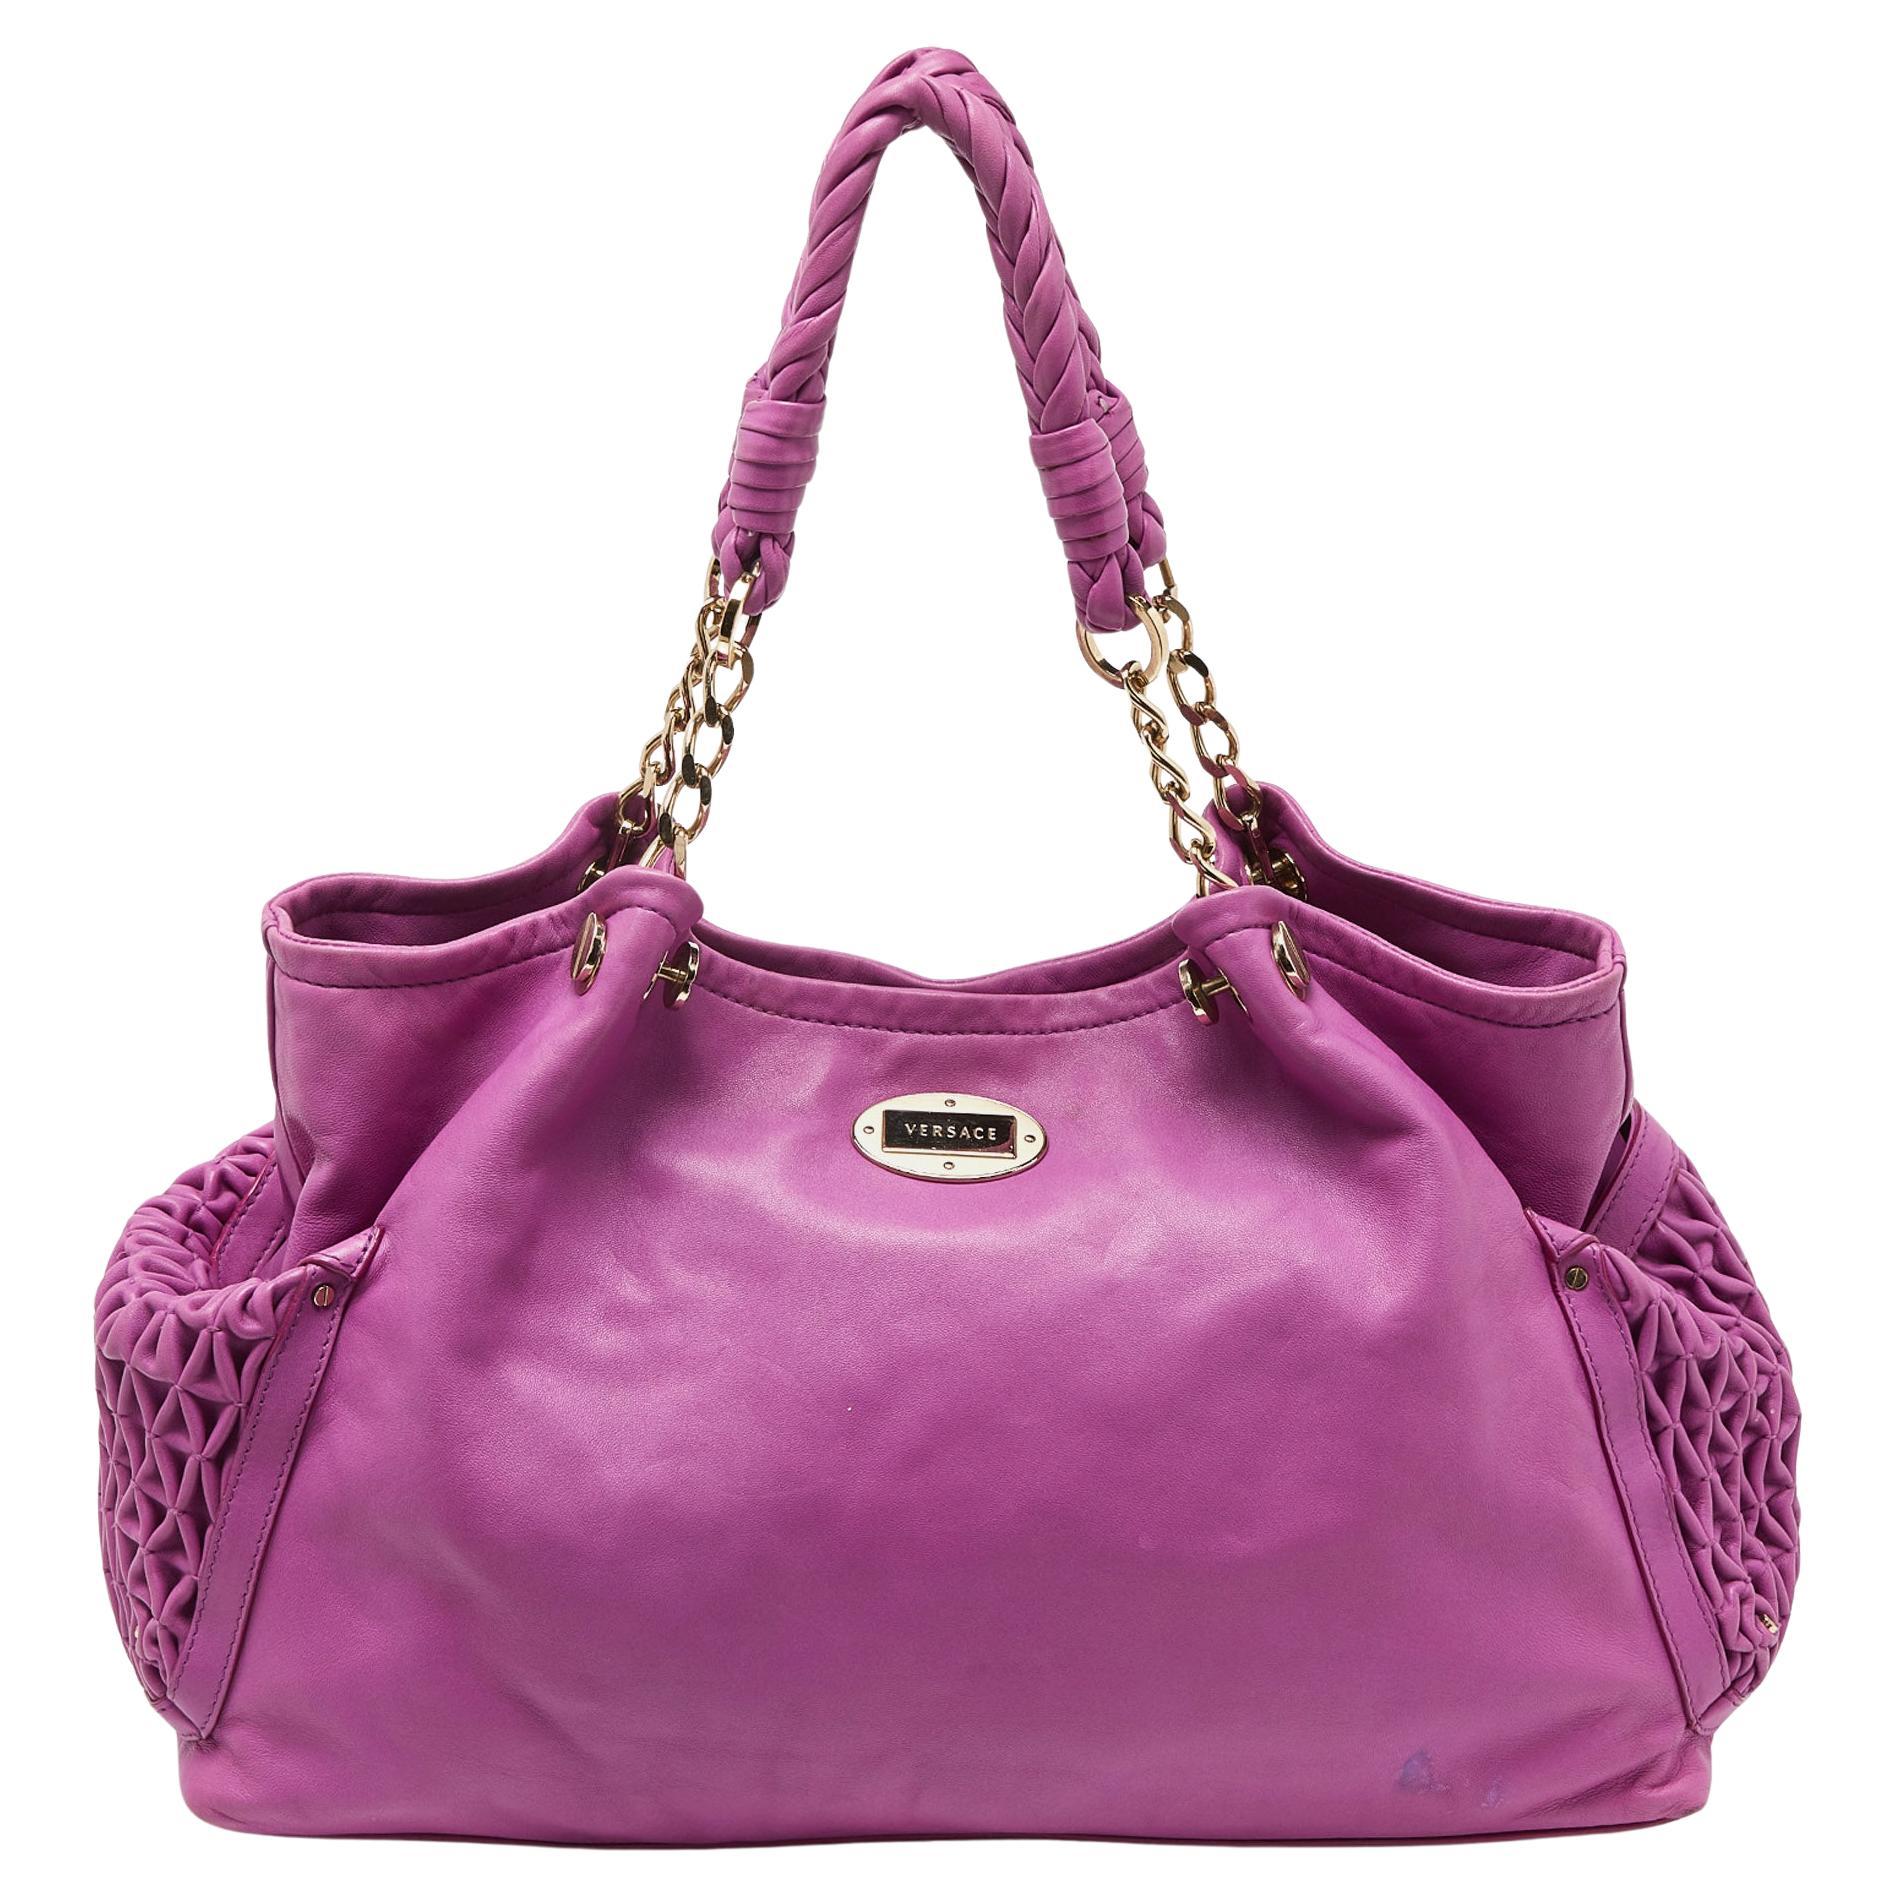 Versace Pink Pleated Leather Chain Satchel For Sale